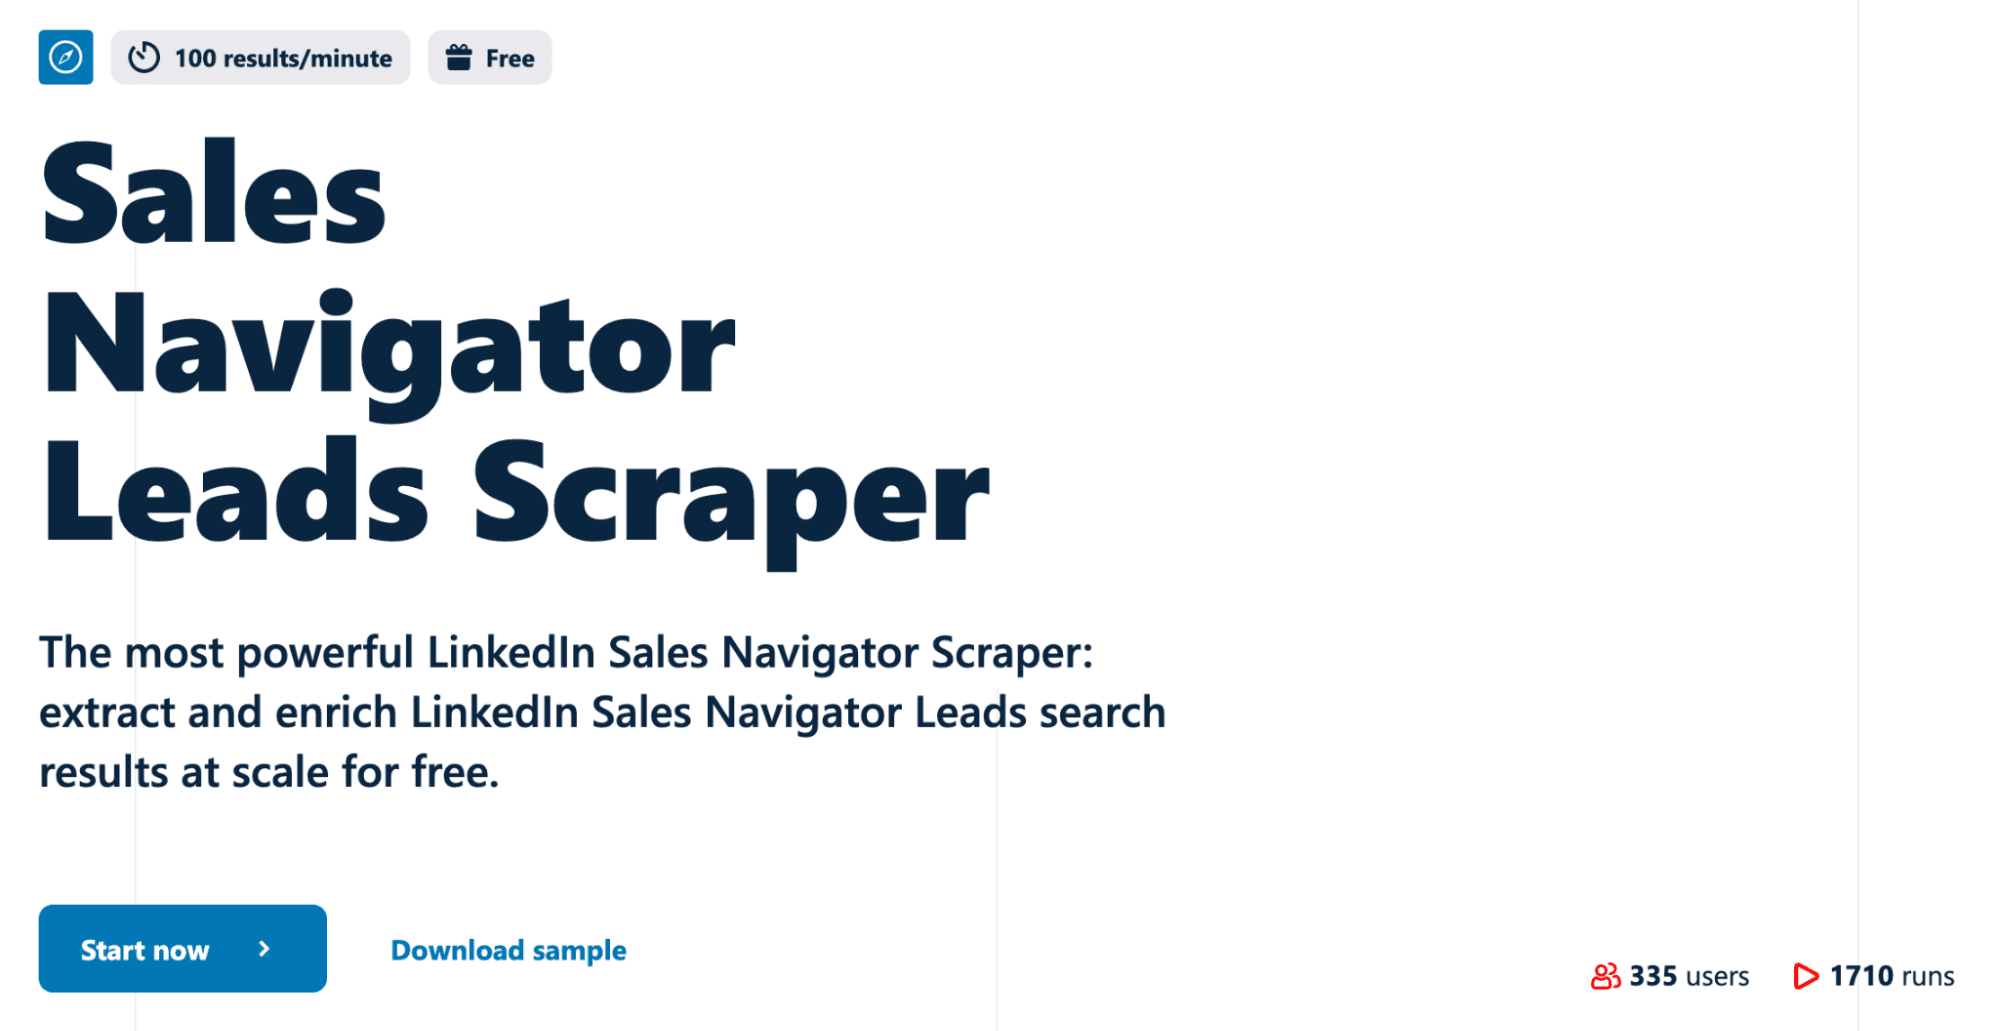 lobstr io sales navigator leads scraper product page - image29.png